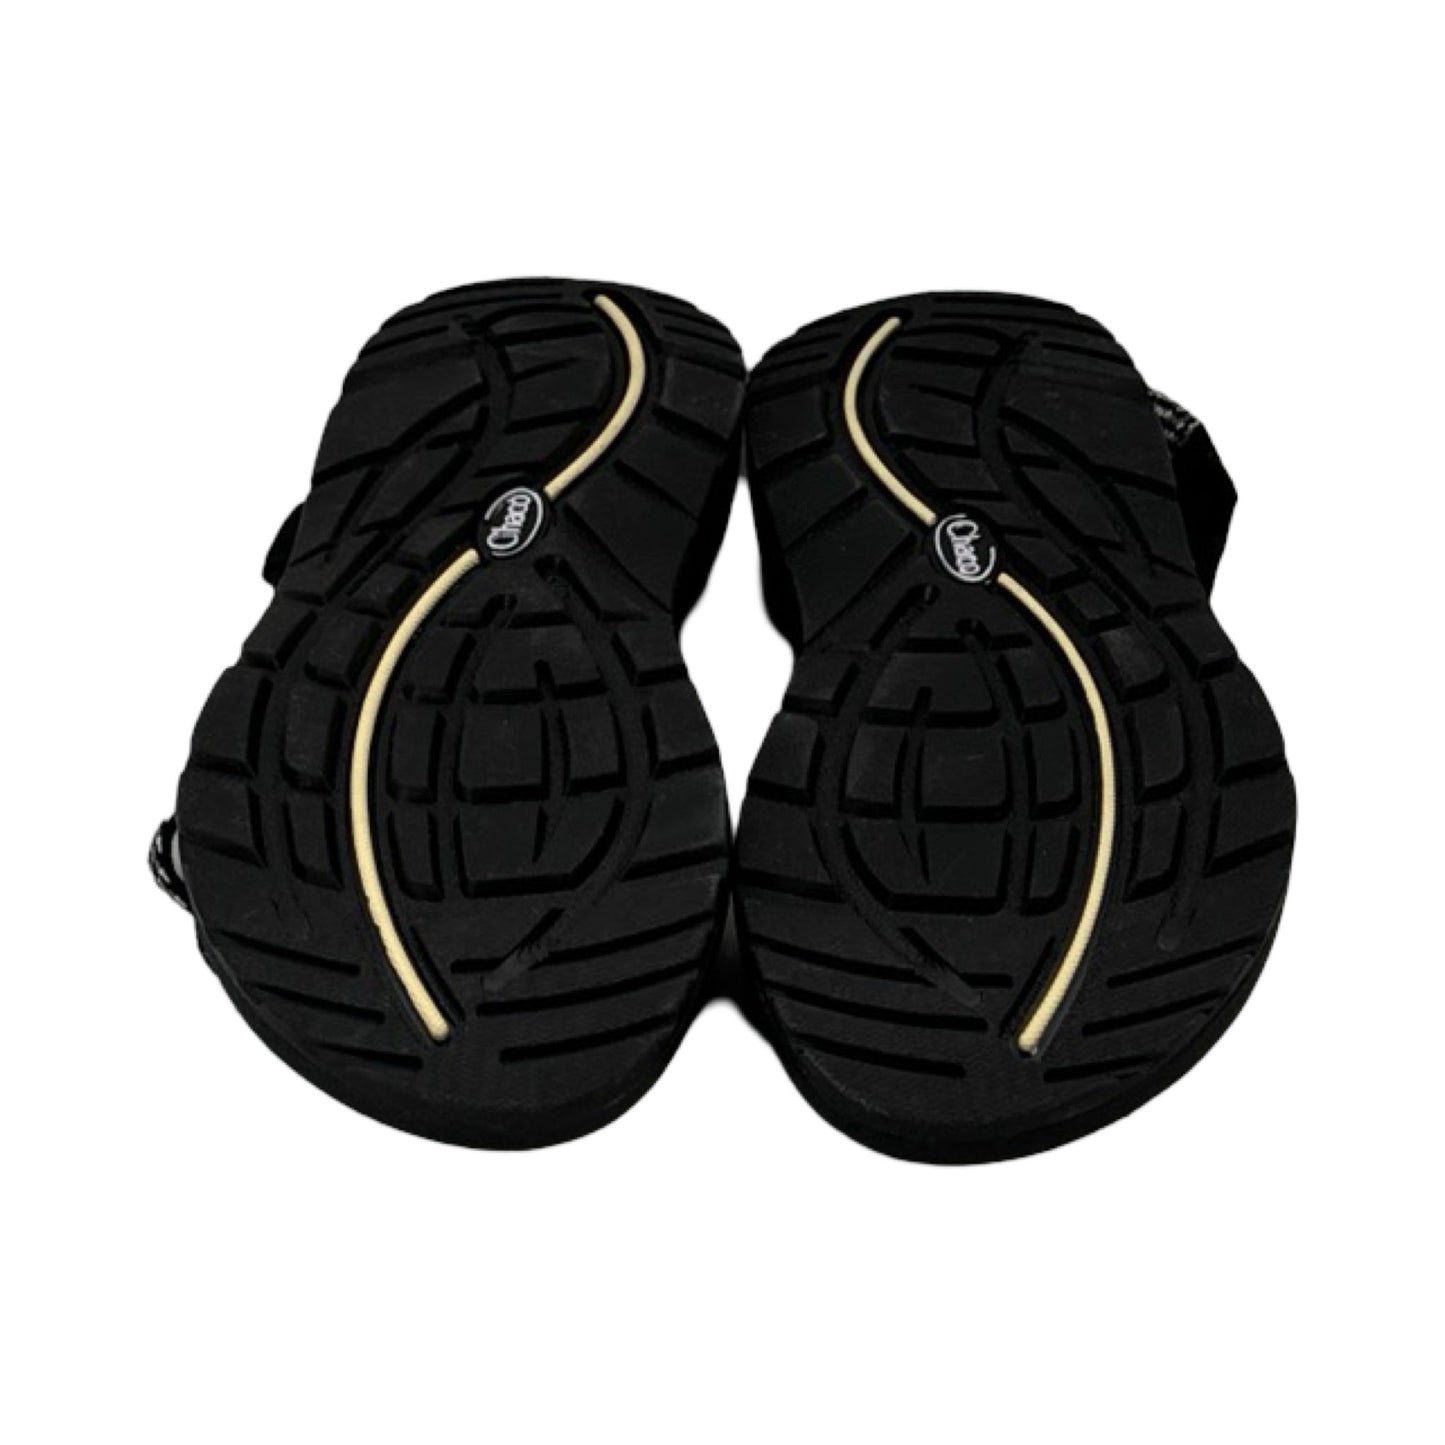 Black Sandals Sport Chacos, Size 8